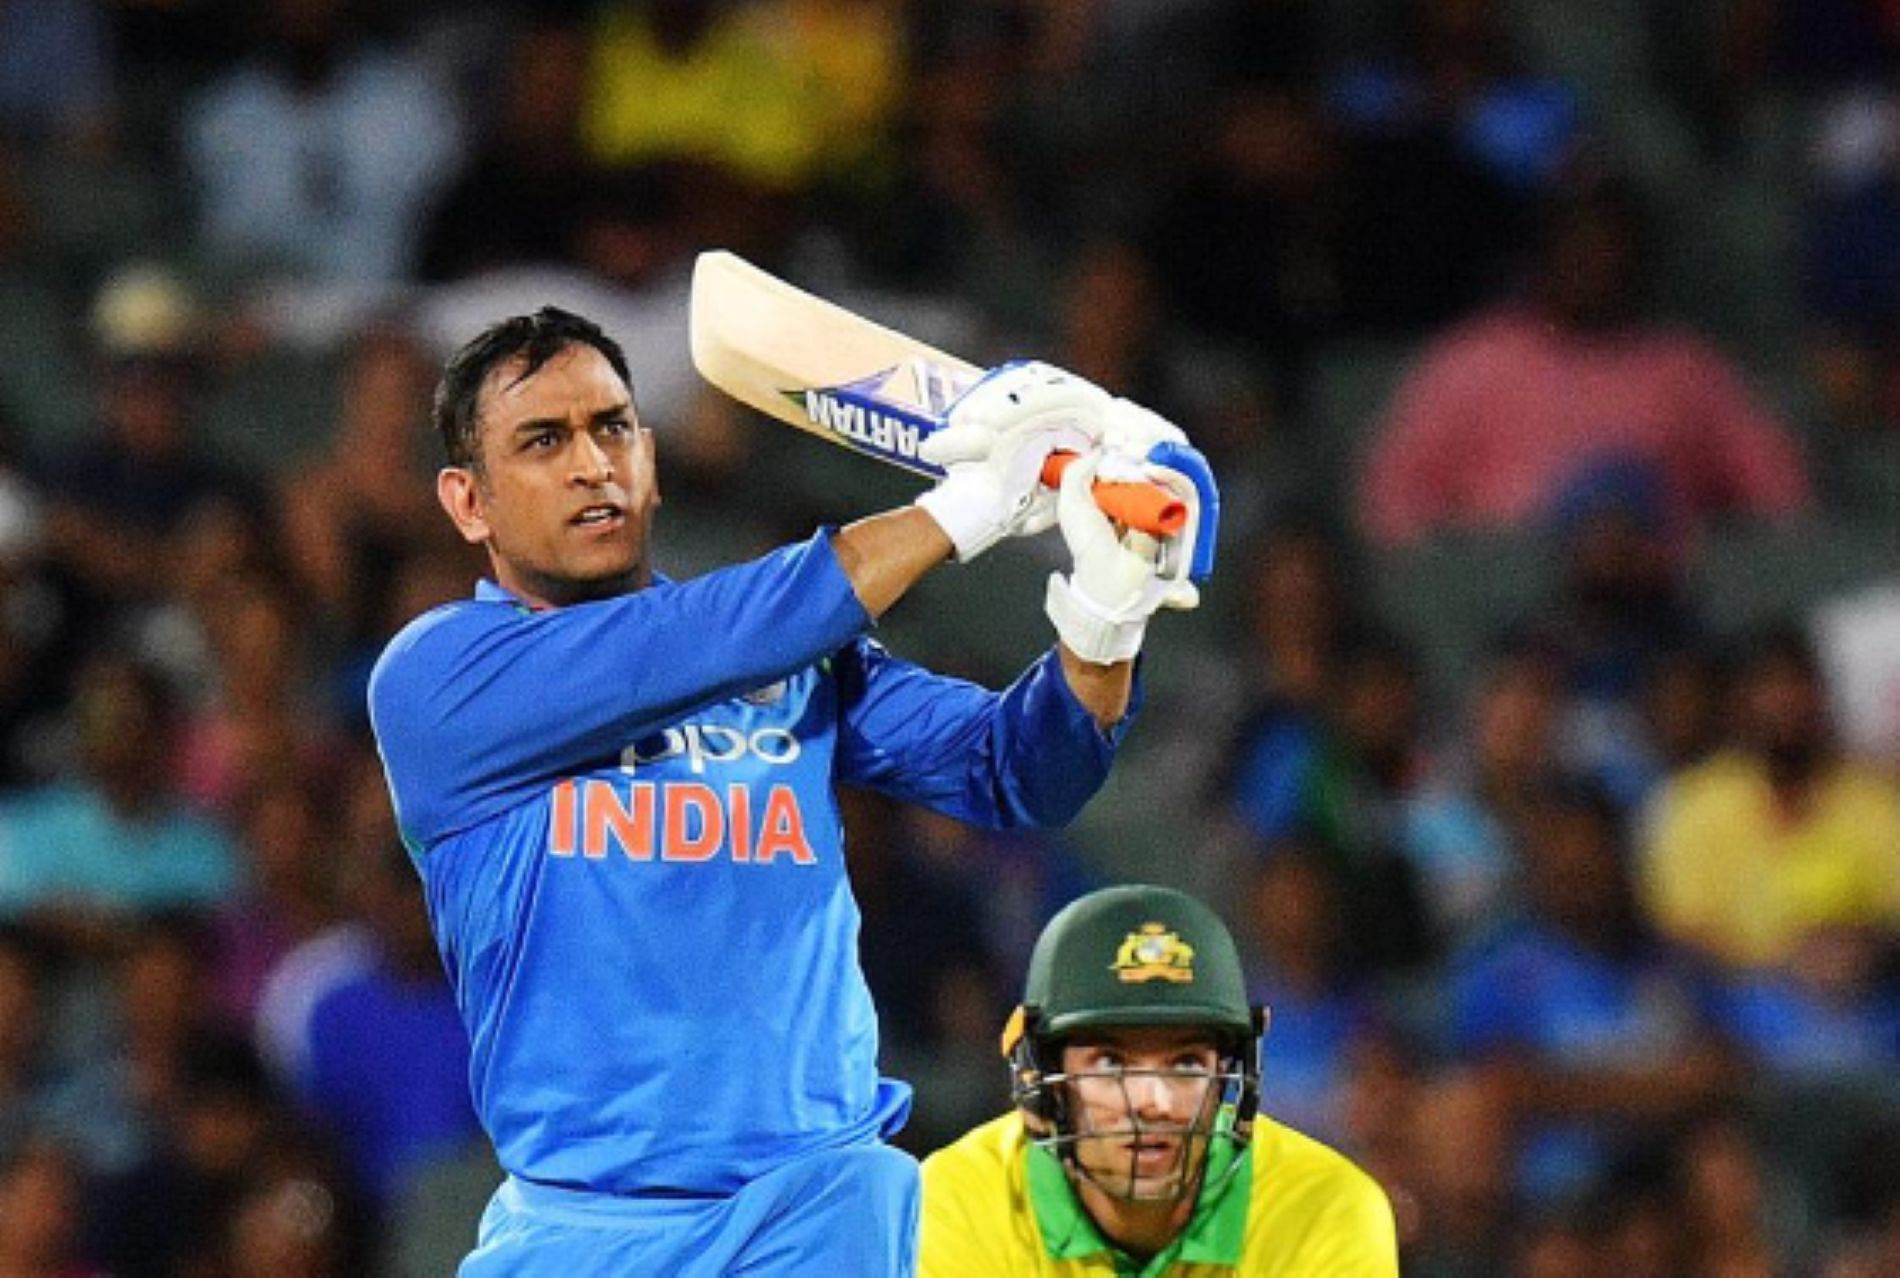 MS Dhoni has inspired several youngsters from the next generation.